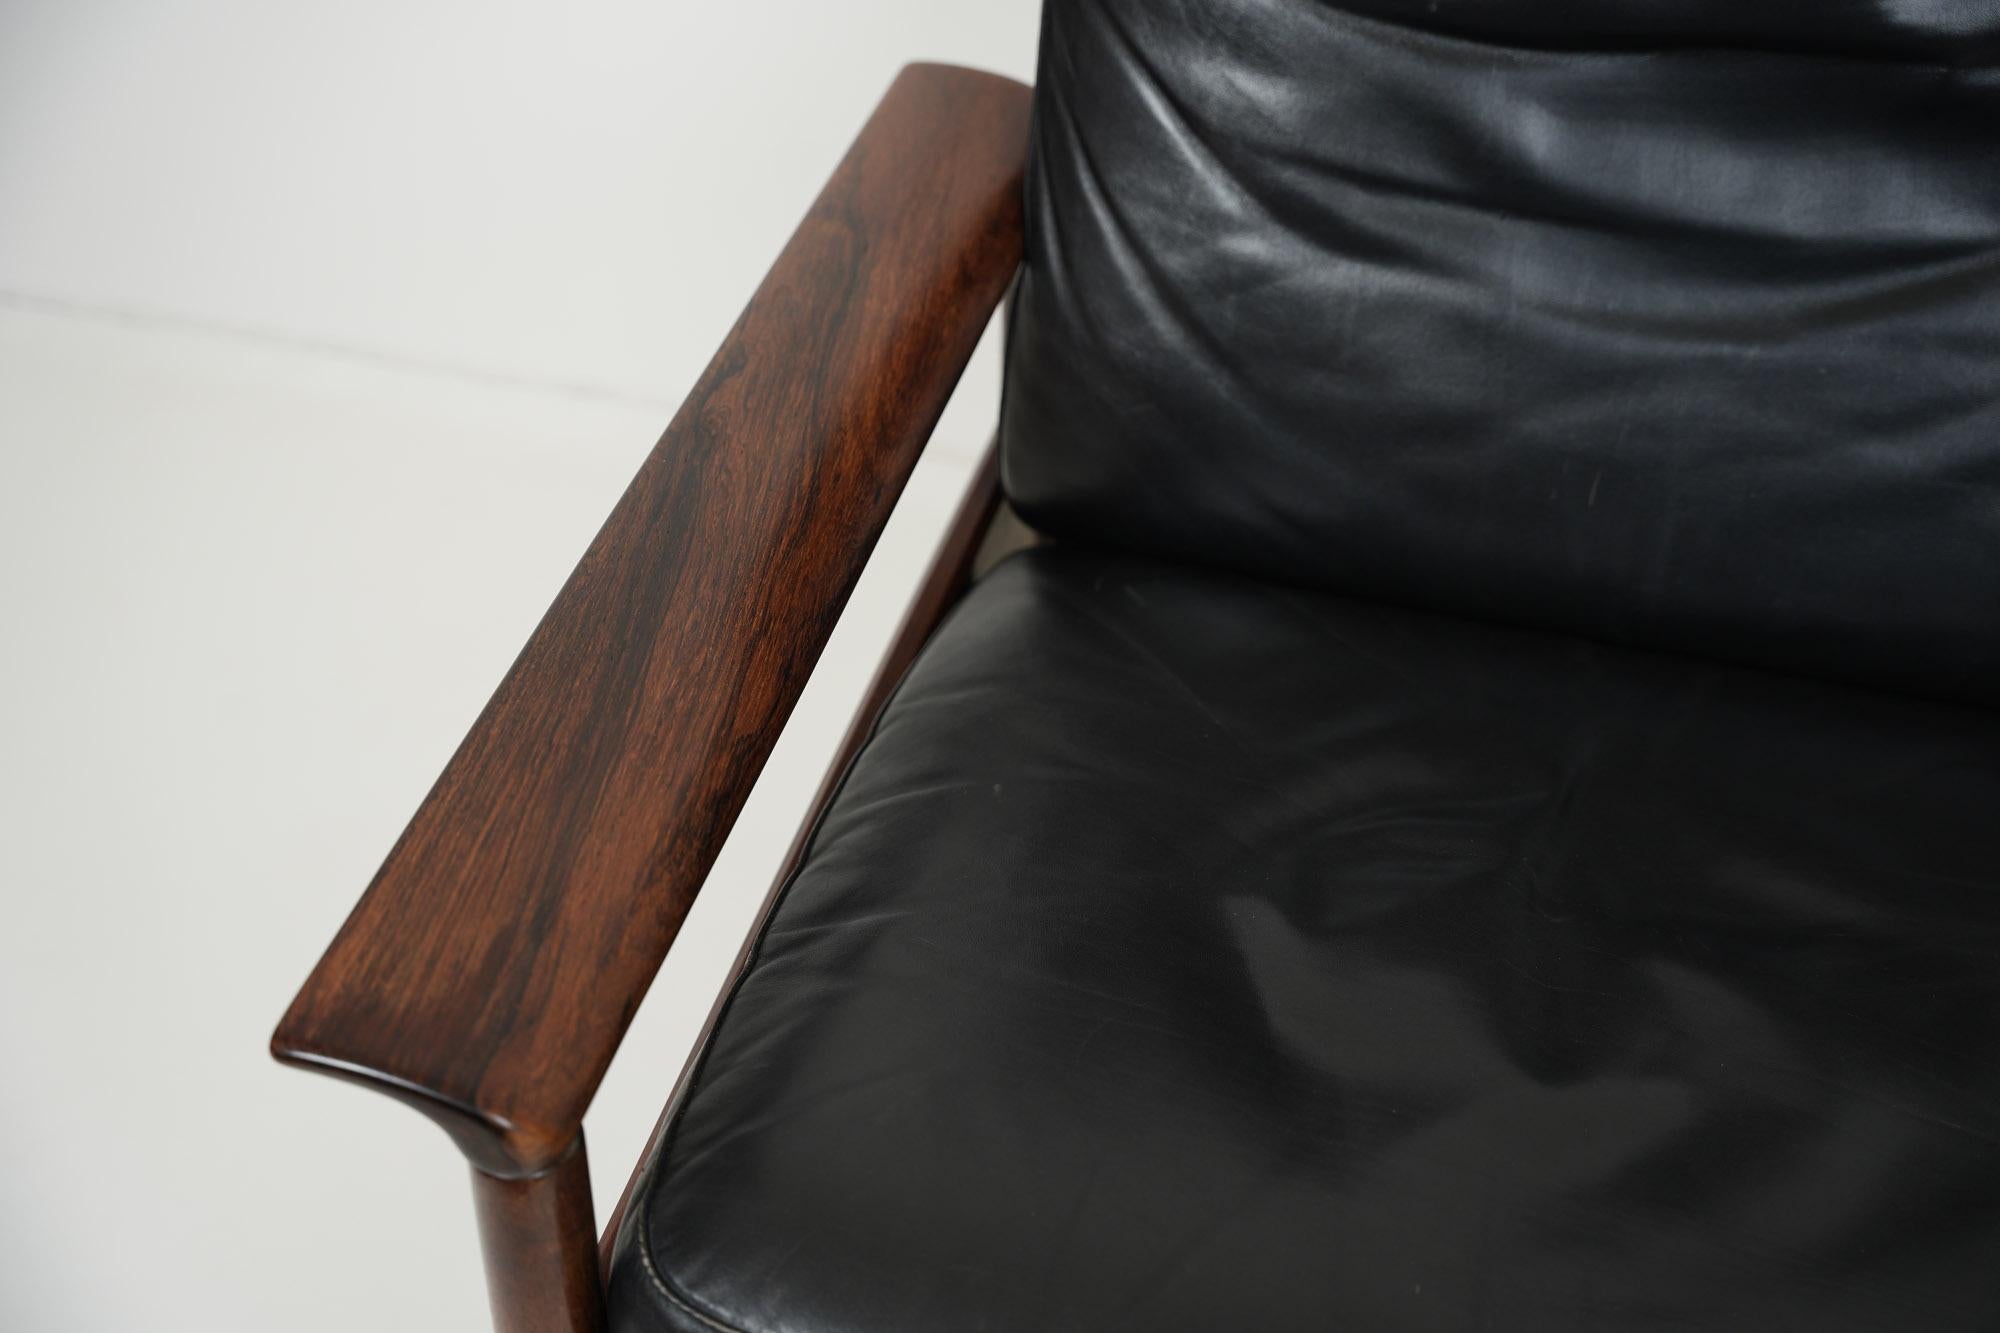 Hans Olsen Leather and Rosewood Longue Chair 1960s For Sale 3